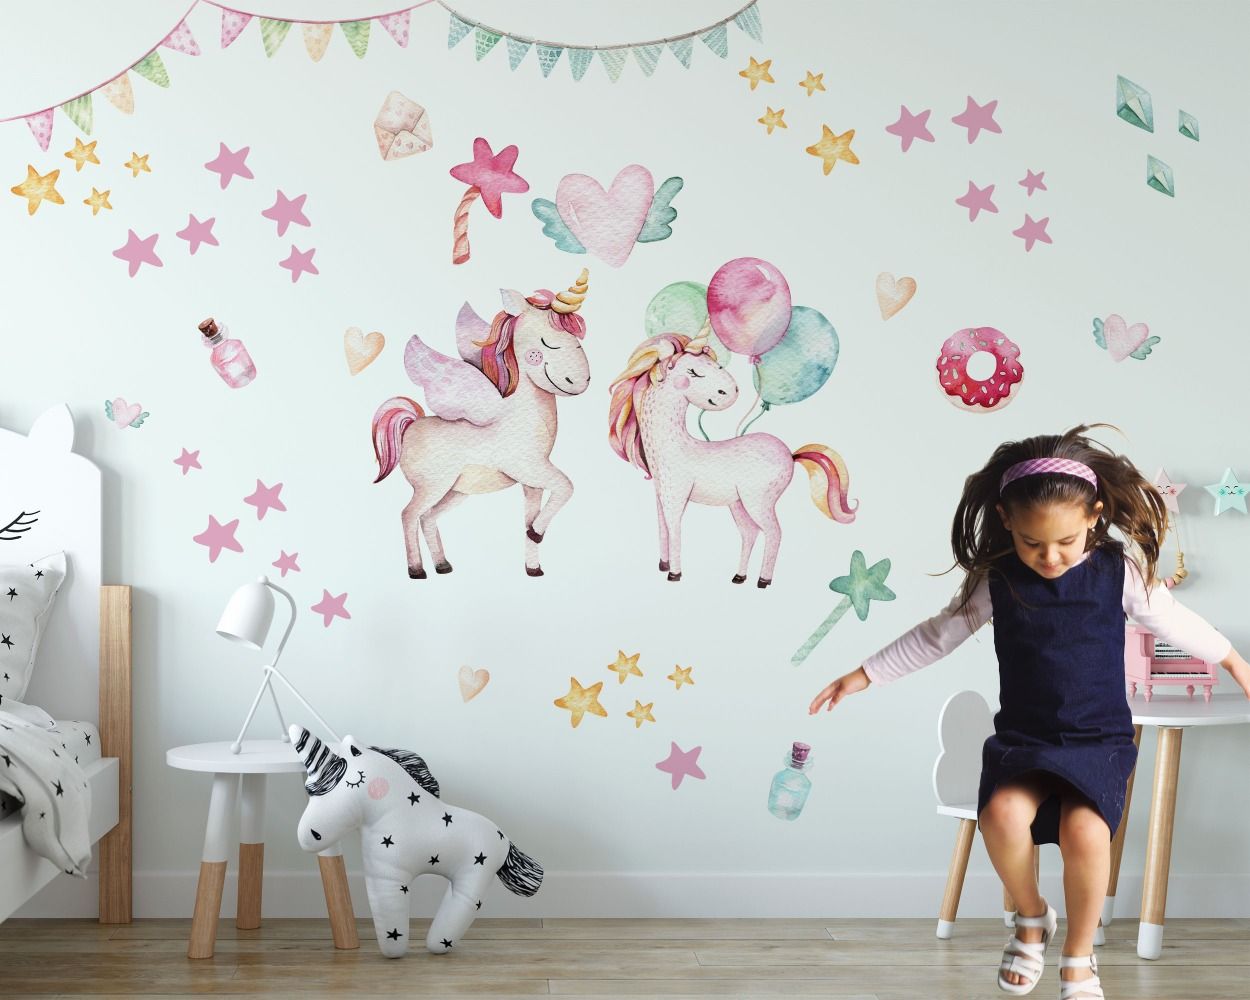 Beautiful Unicorn With Star And Moon Vinyl Wall Stickers For Kids' Room wall decor